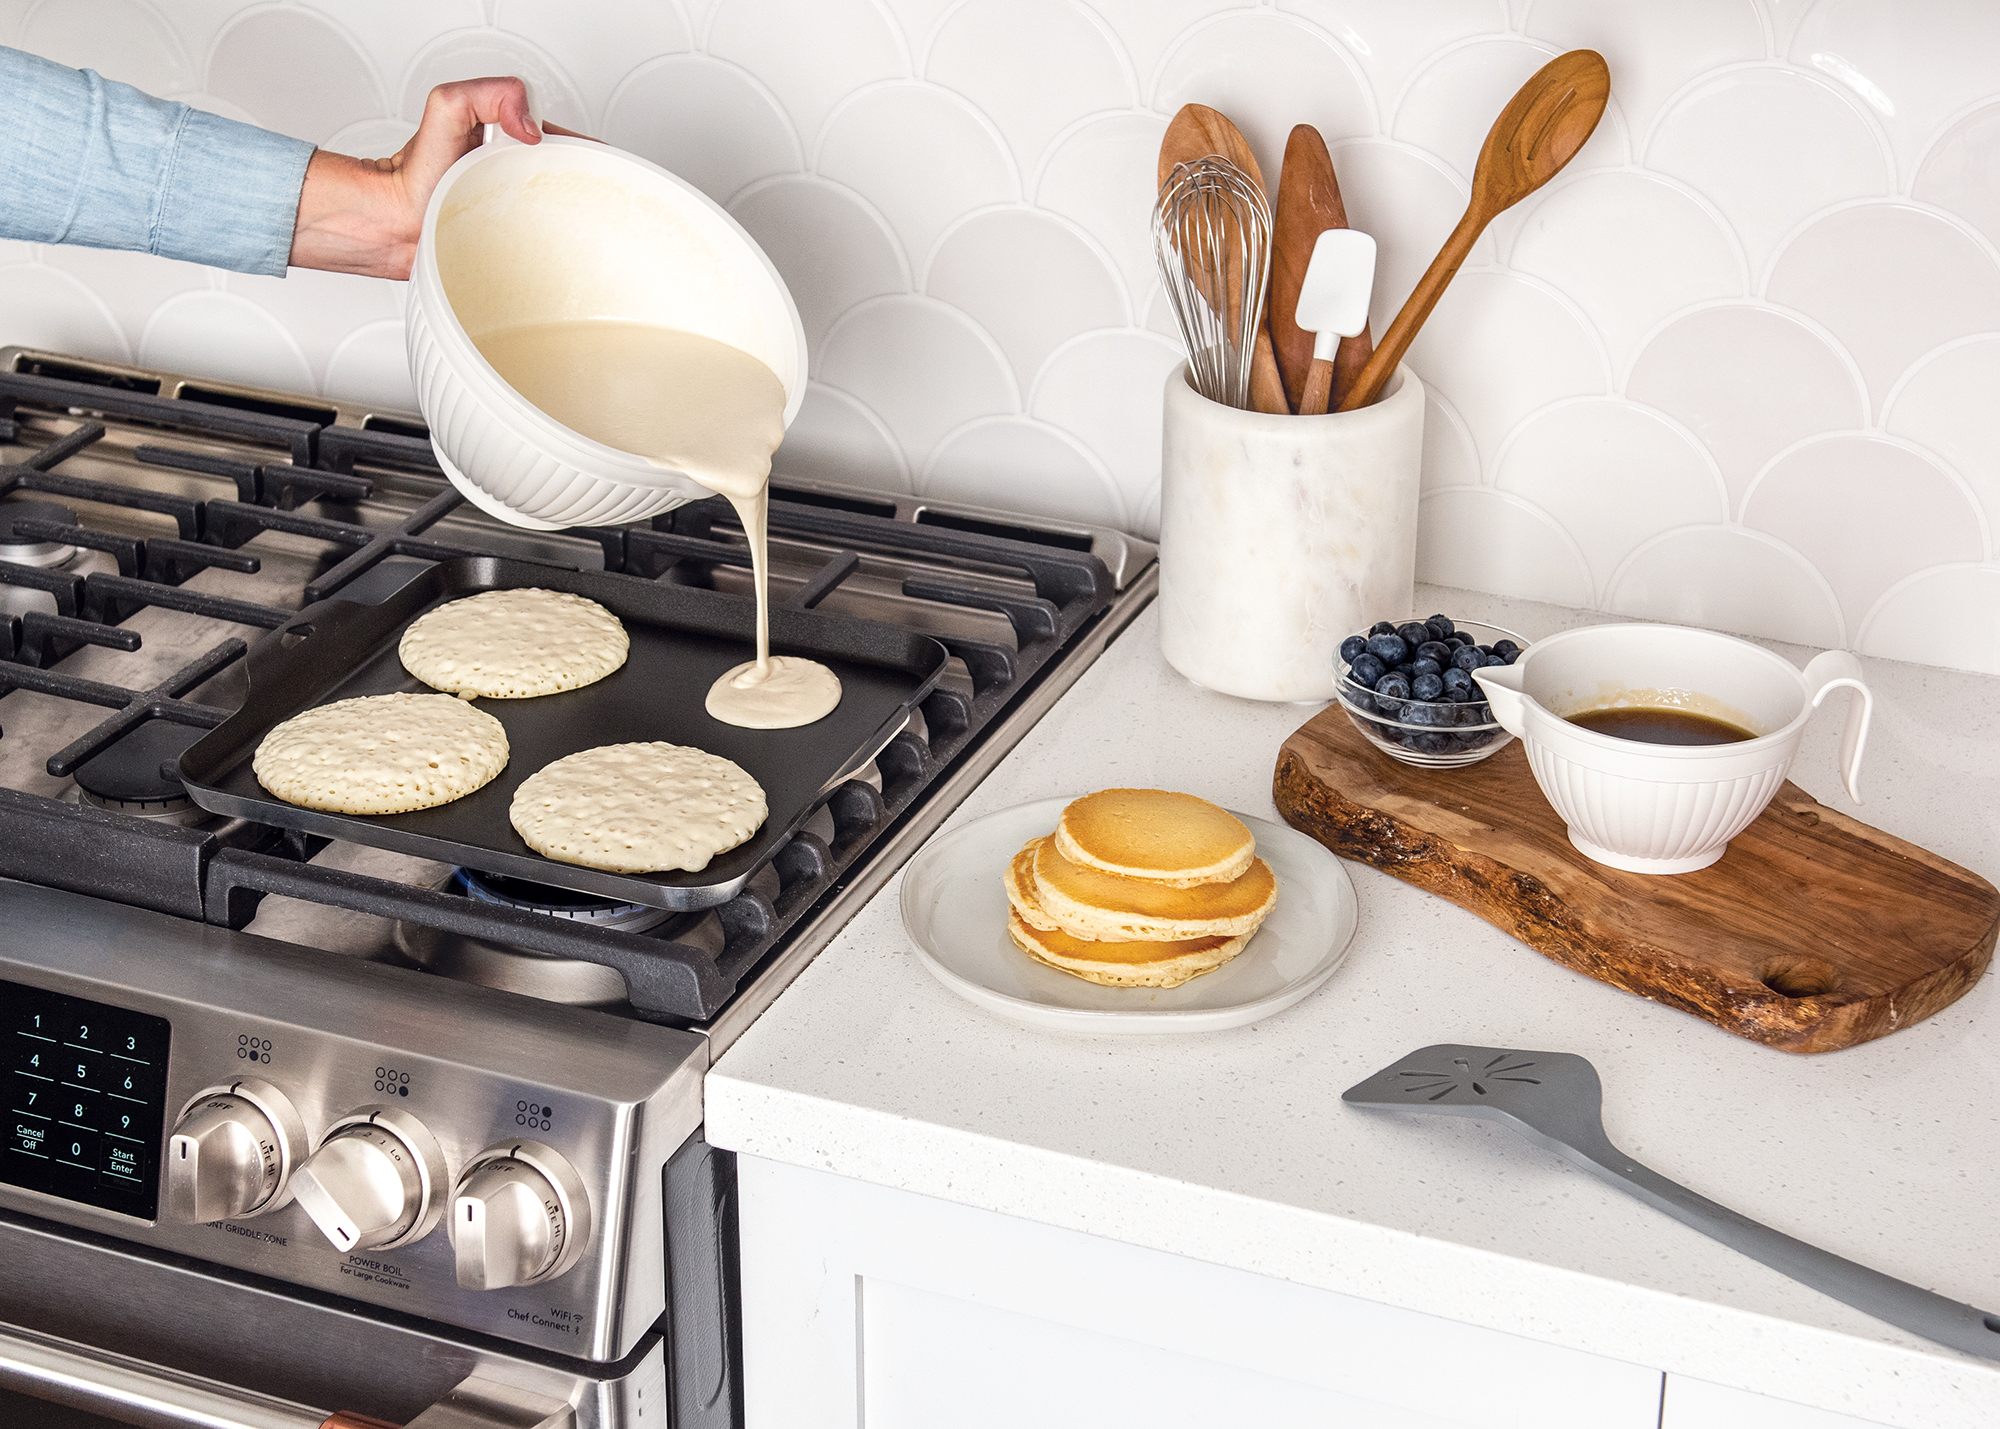 Hand pour pancake batter on square griddle on stovetop in breakfast scene